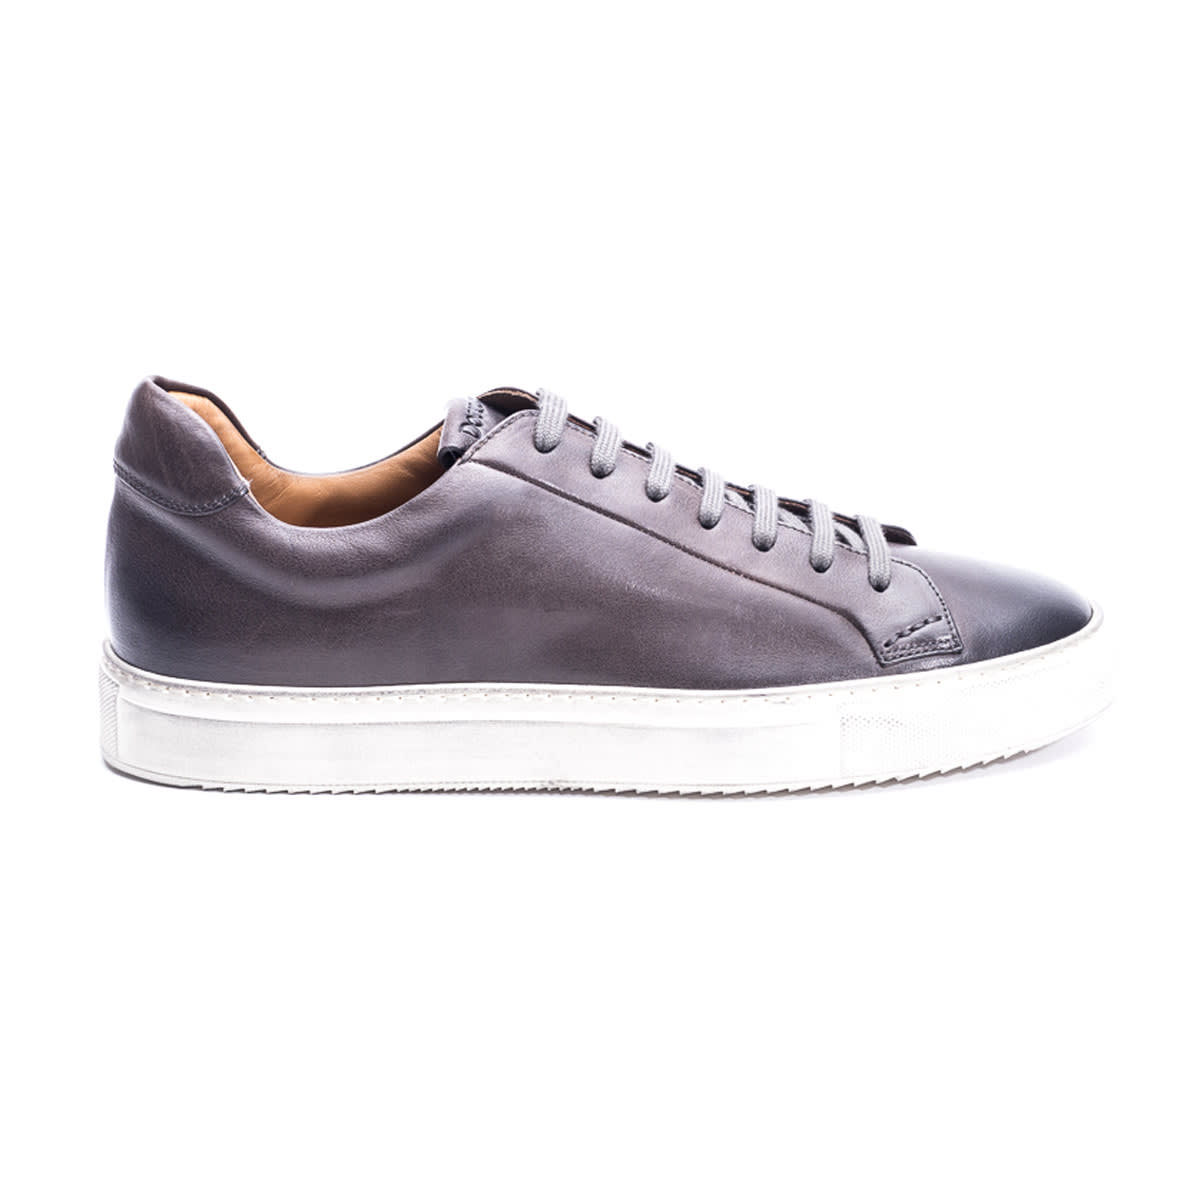 Doucal's Doucal's Leather Sneakers - BROWN - 11013950 | italist